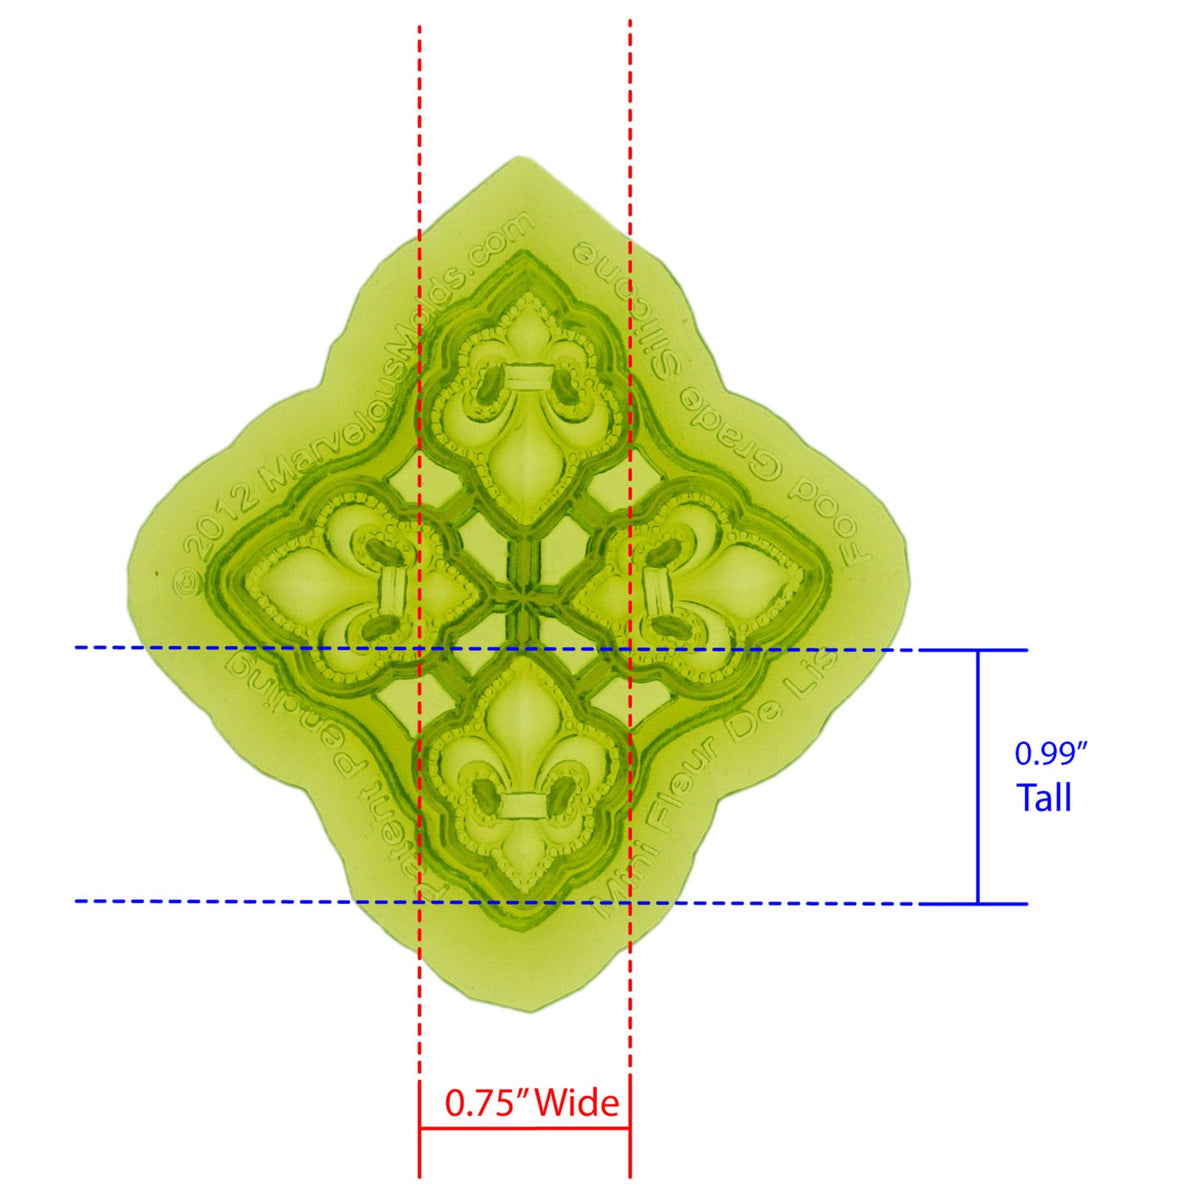 Mini Fleur De Lis Silicone Mold Cavity Measures .75 inches by .99 inches Tall, proudly Made in USA